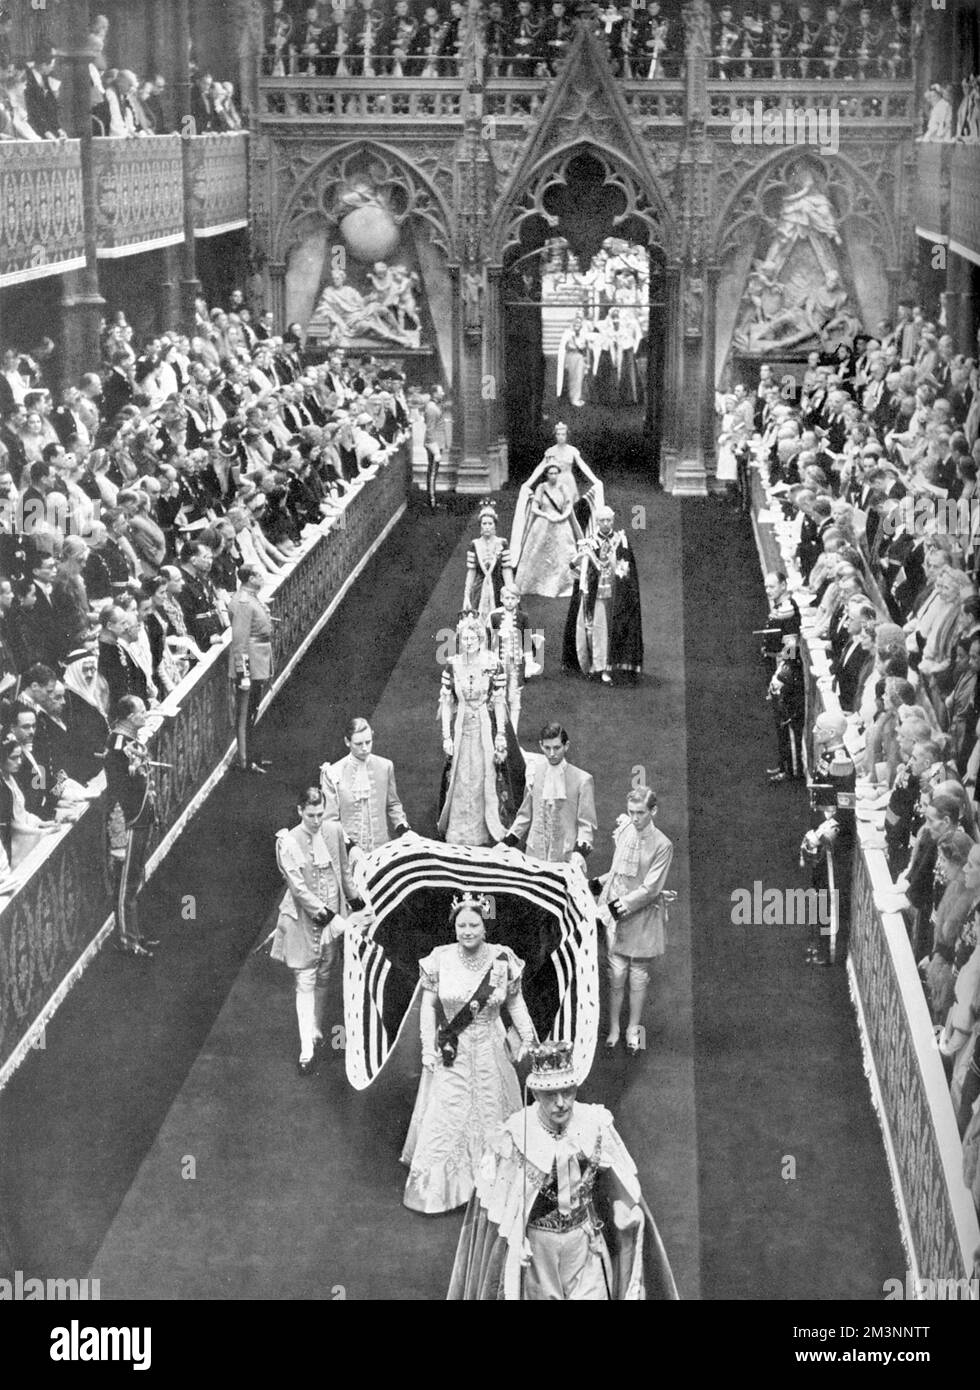 Queen Elizabeth, the Queen Mother passes along the nave of Westminster Abbey en route from the Annexe for the Coronation of her daughter, Queen Elizabeth II in June 1953.  She is followed by Princess Margaret and her retinue.     Date: 1953 Stock Photo